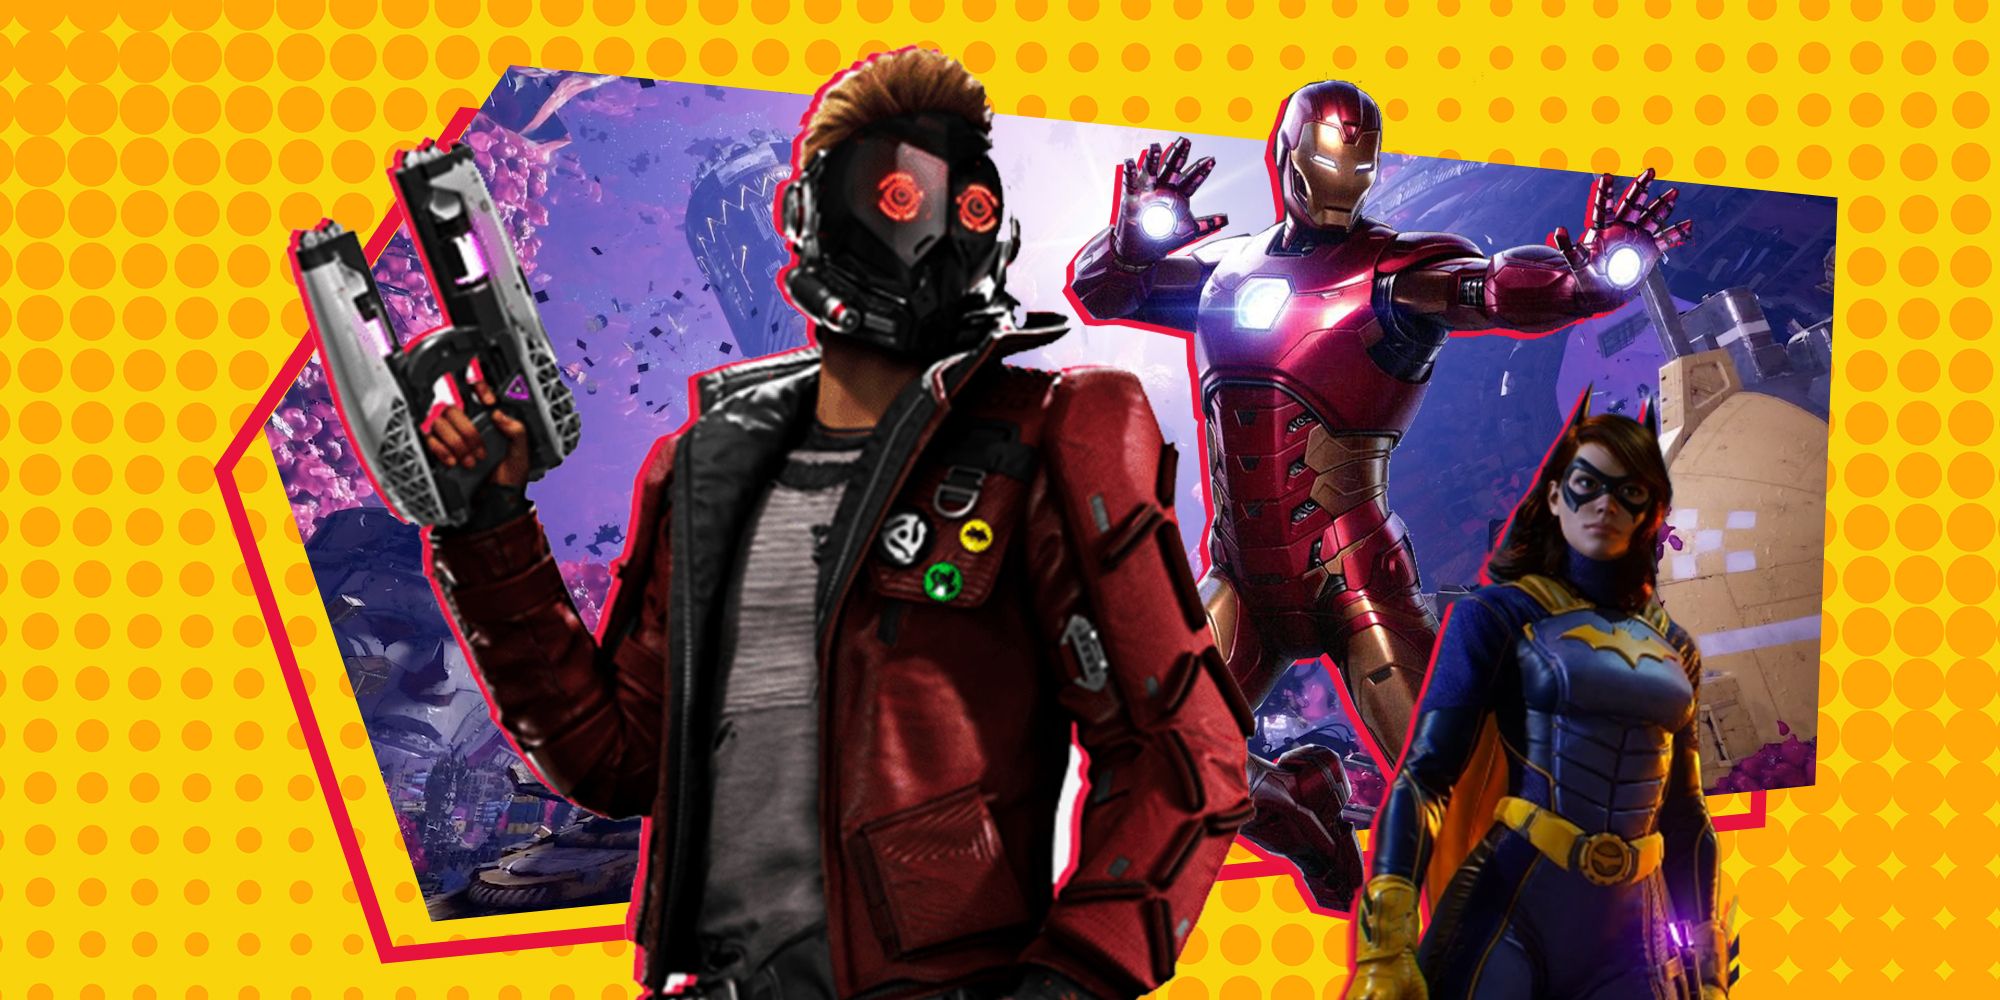 star-lord, iron man, and batgirl from guardians of the galaxy, marvel's avengers, and gotham knights